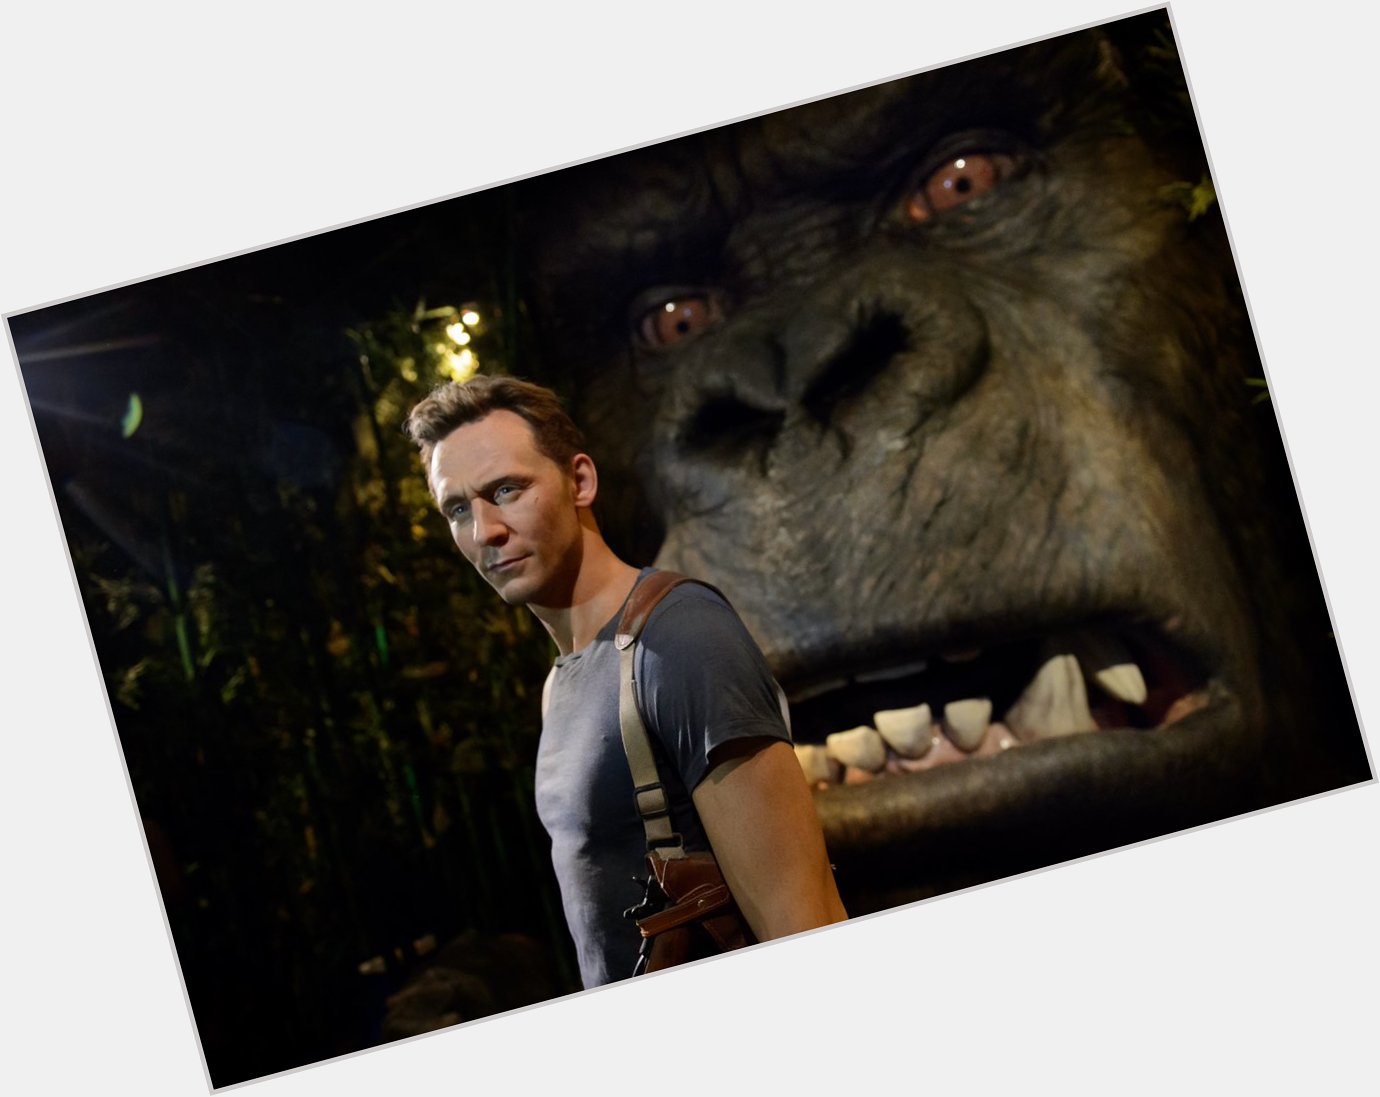 Happy Birthday Tom Hiddleston! You can meet Tom as Captain James Conrad, bravely standing next to Kong!   